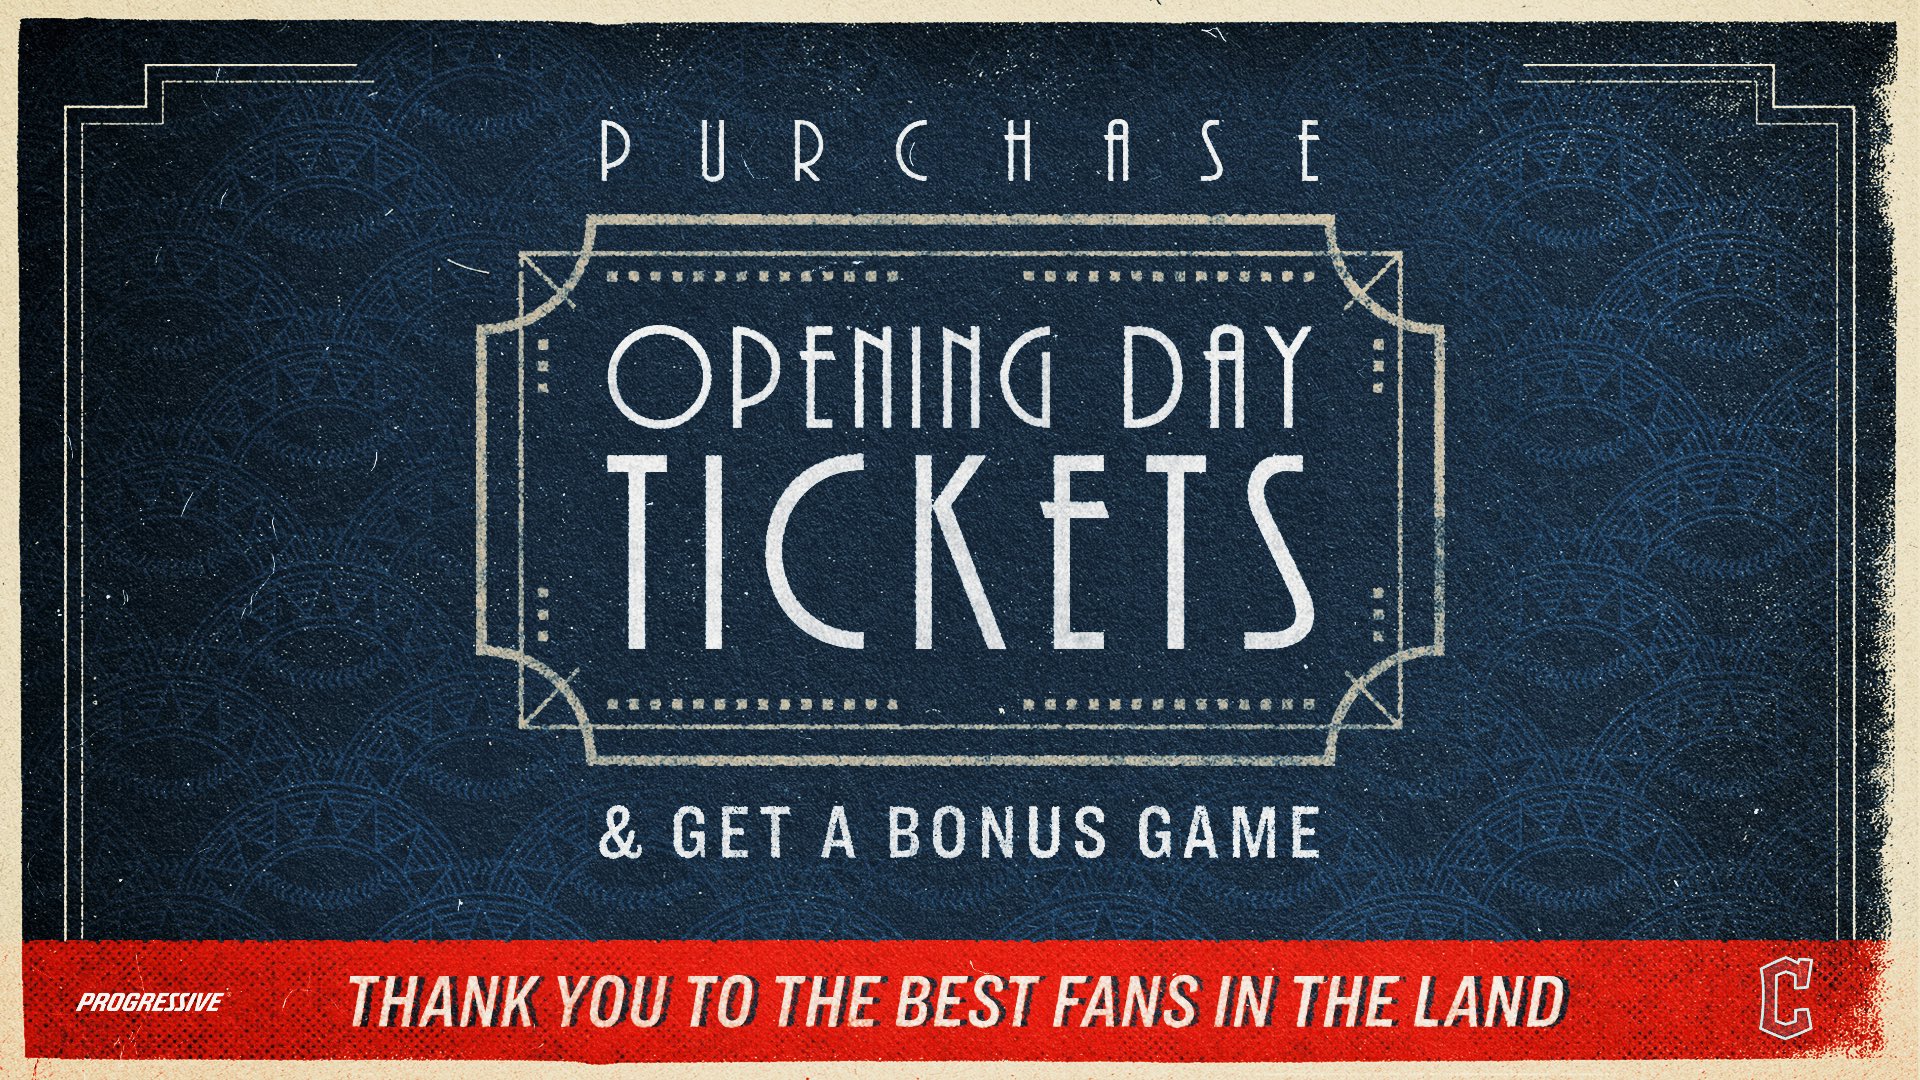 Cleveland Guardians on Twitter "Opening Day tickets are here! Anyone